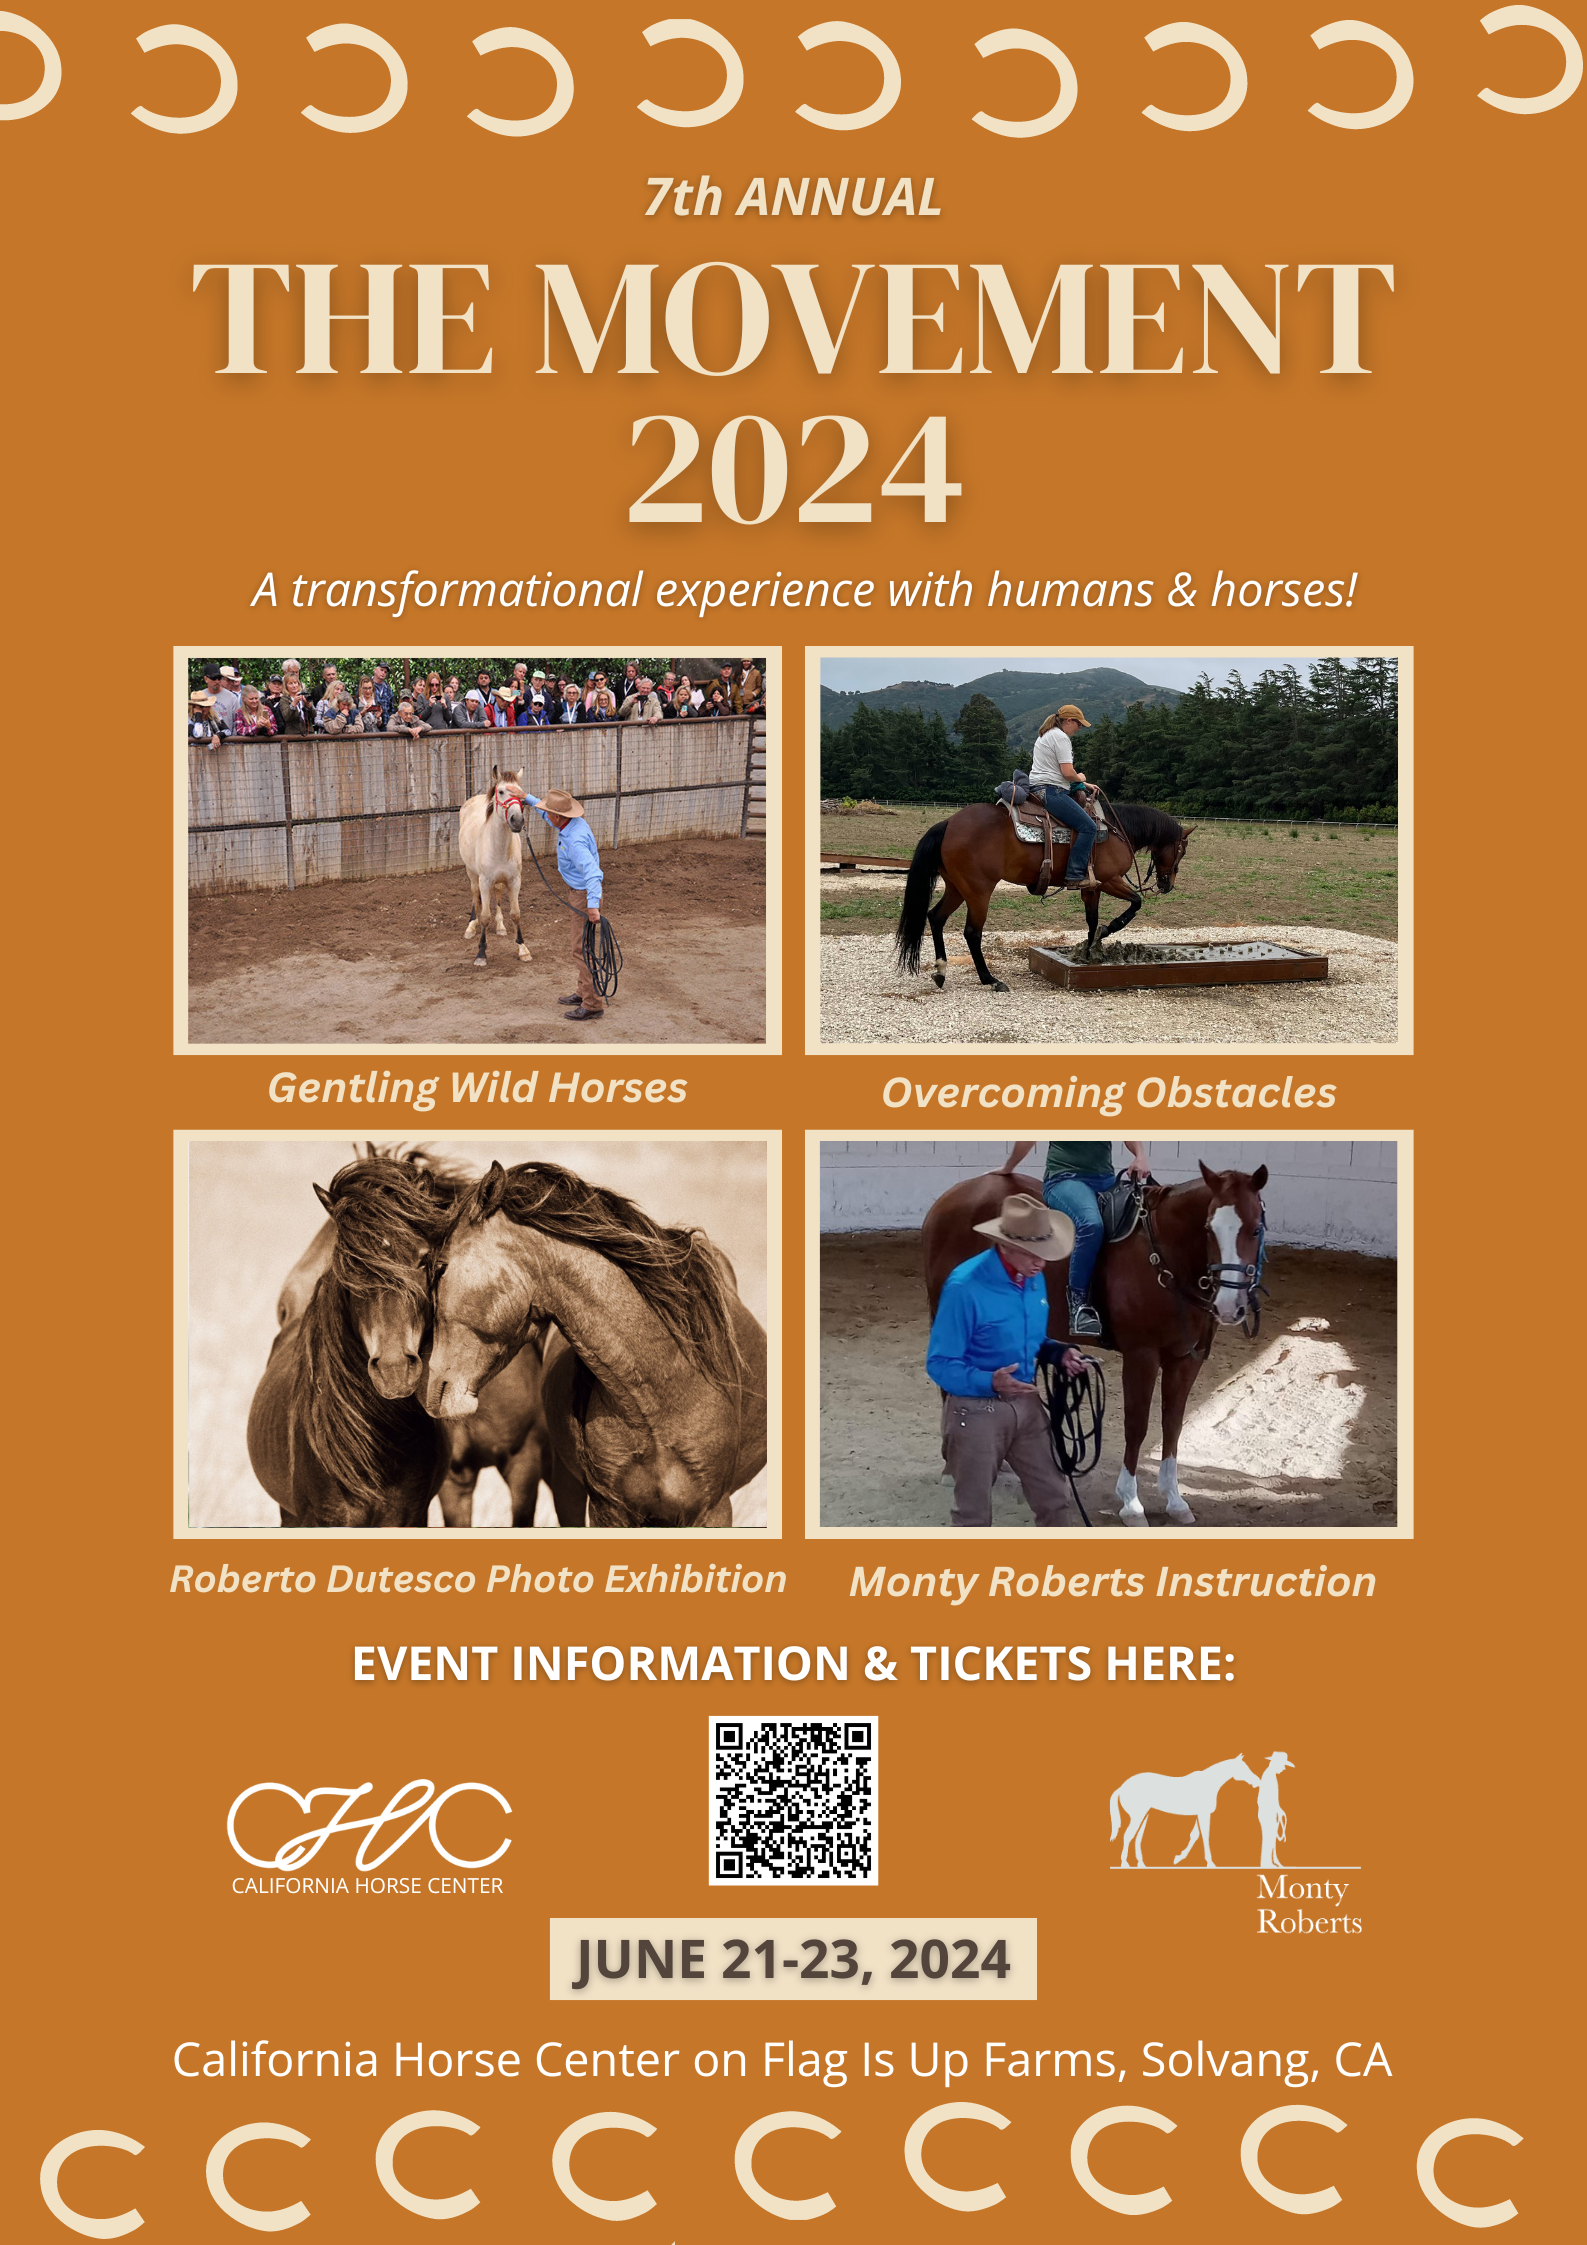 EVENTS: THE MOVEMENT 2024